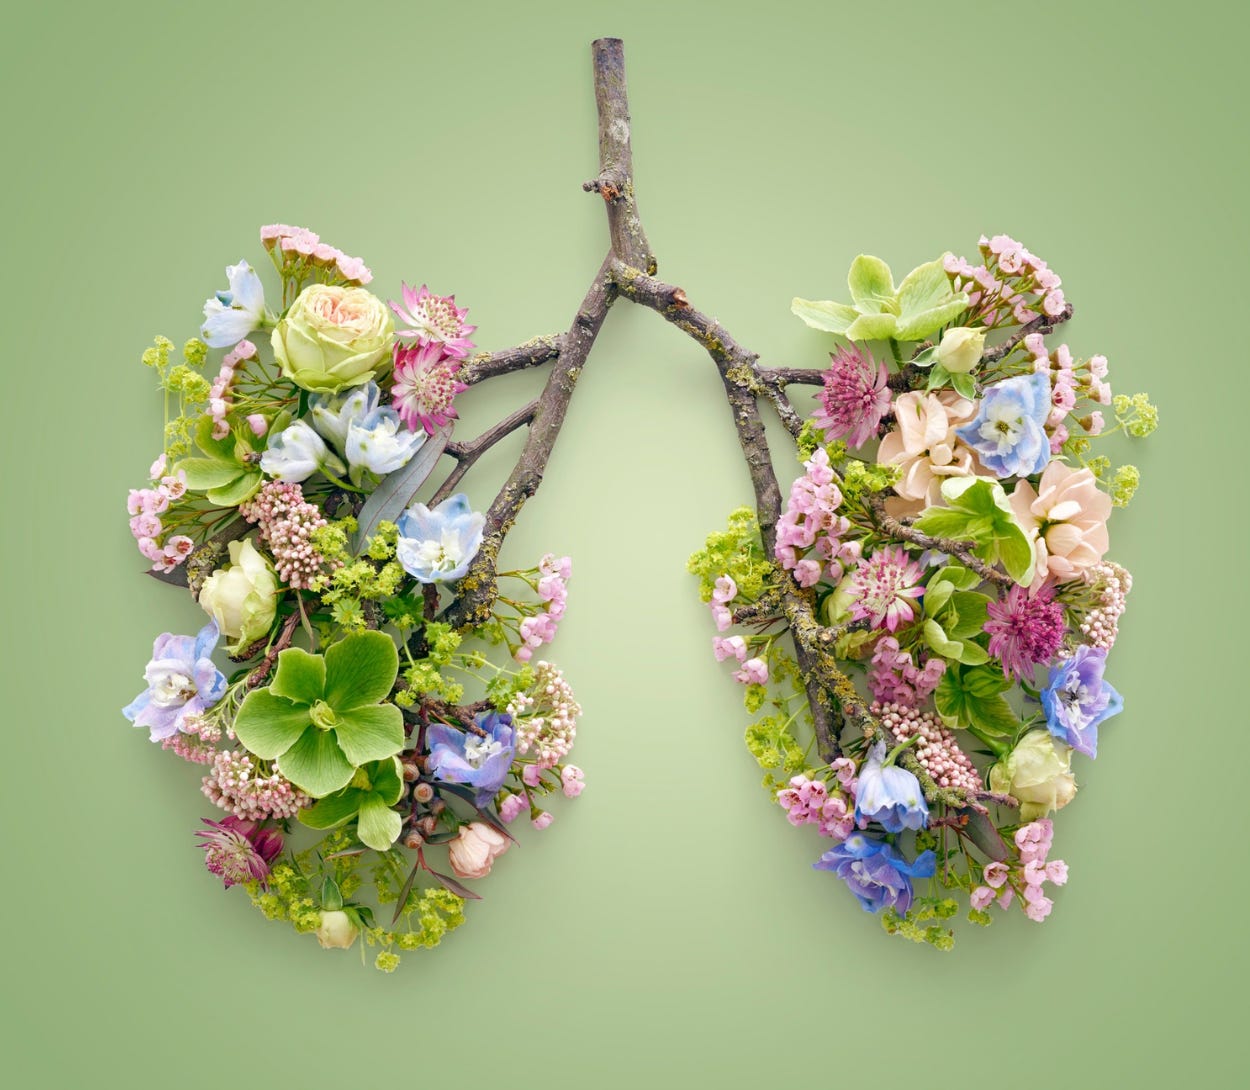 Small divided branch to represent lungs, with fresh flowers and greenery on each side of the divided branch 